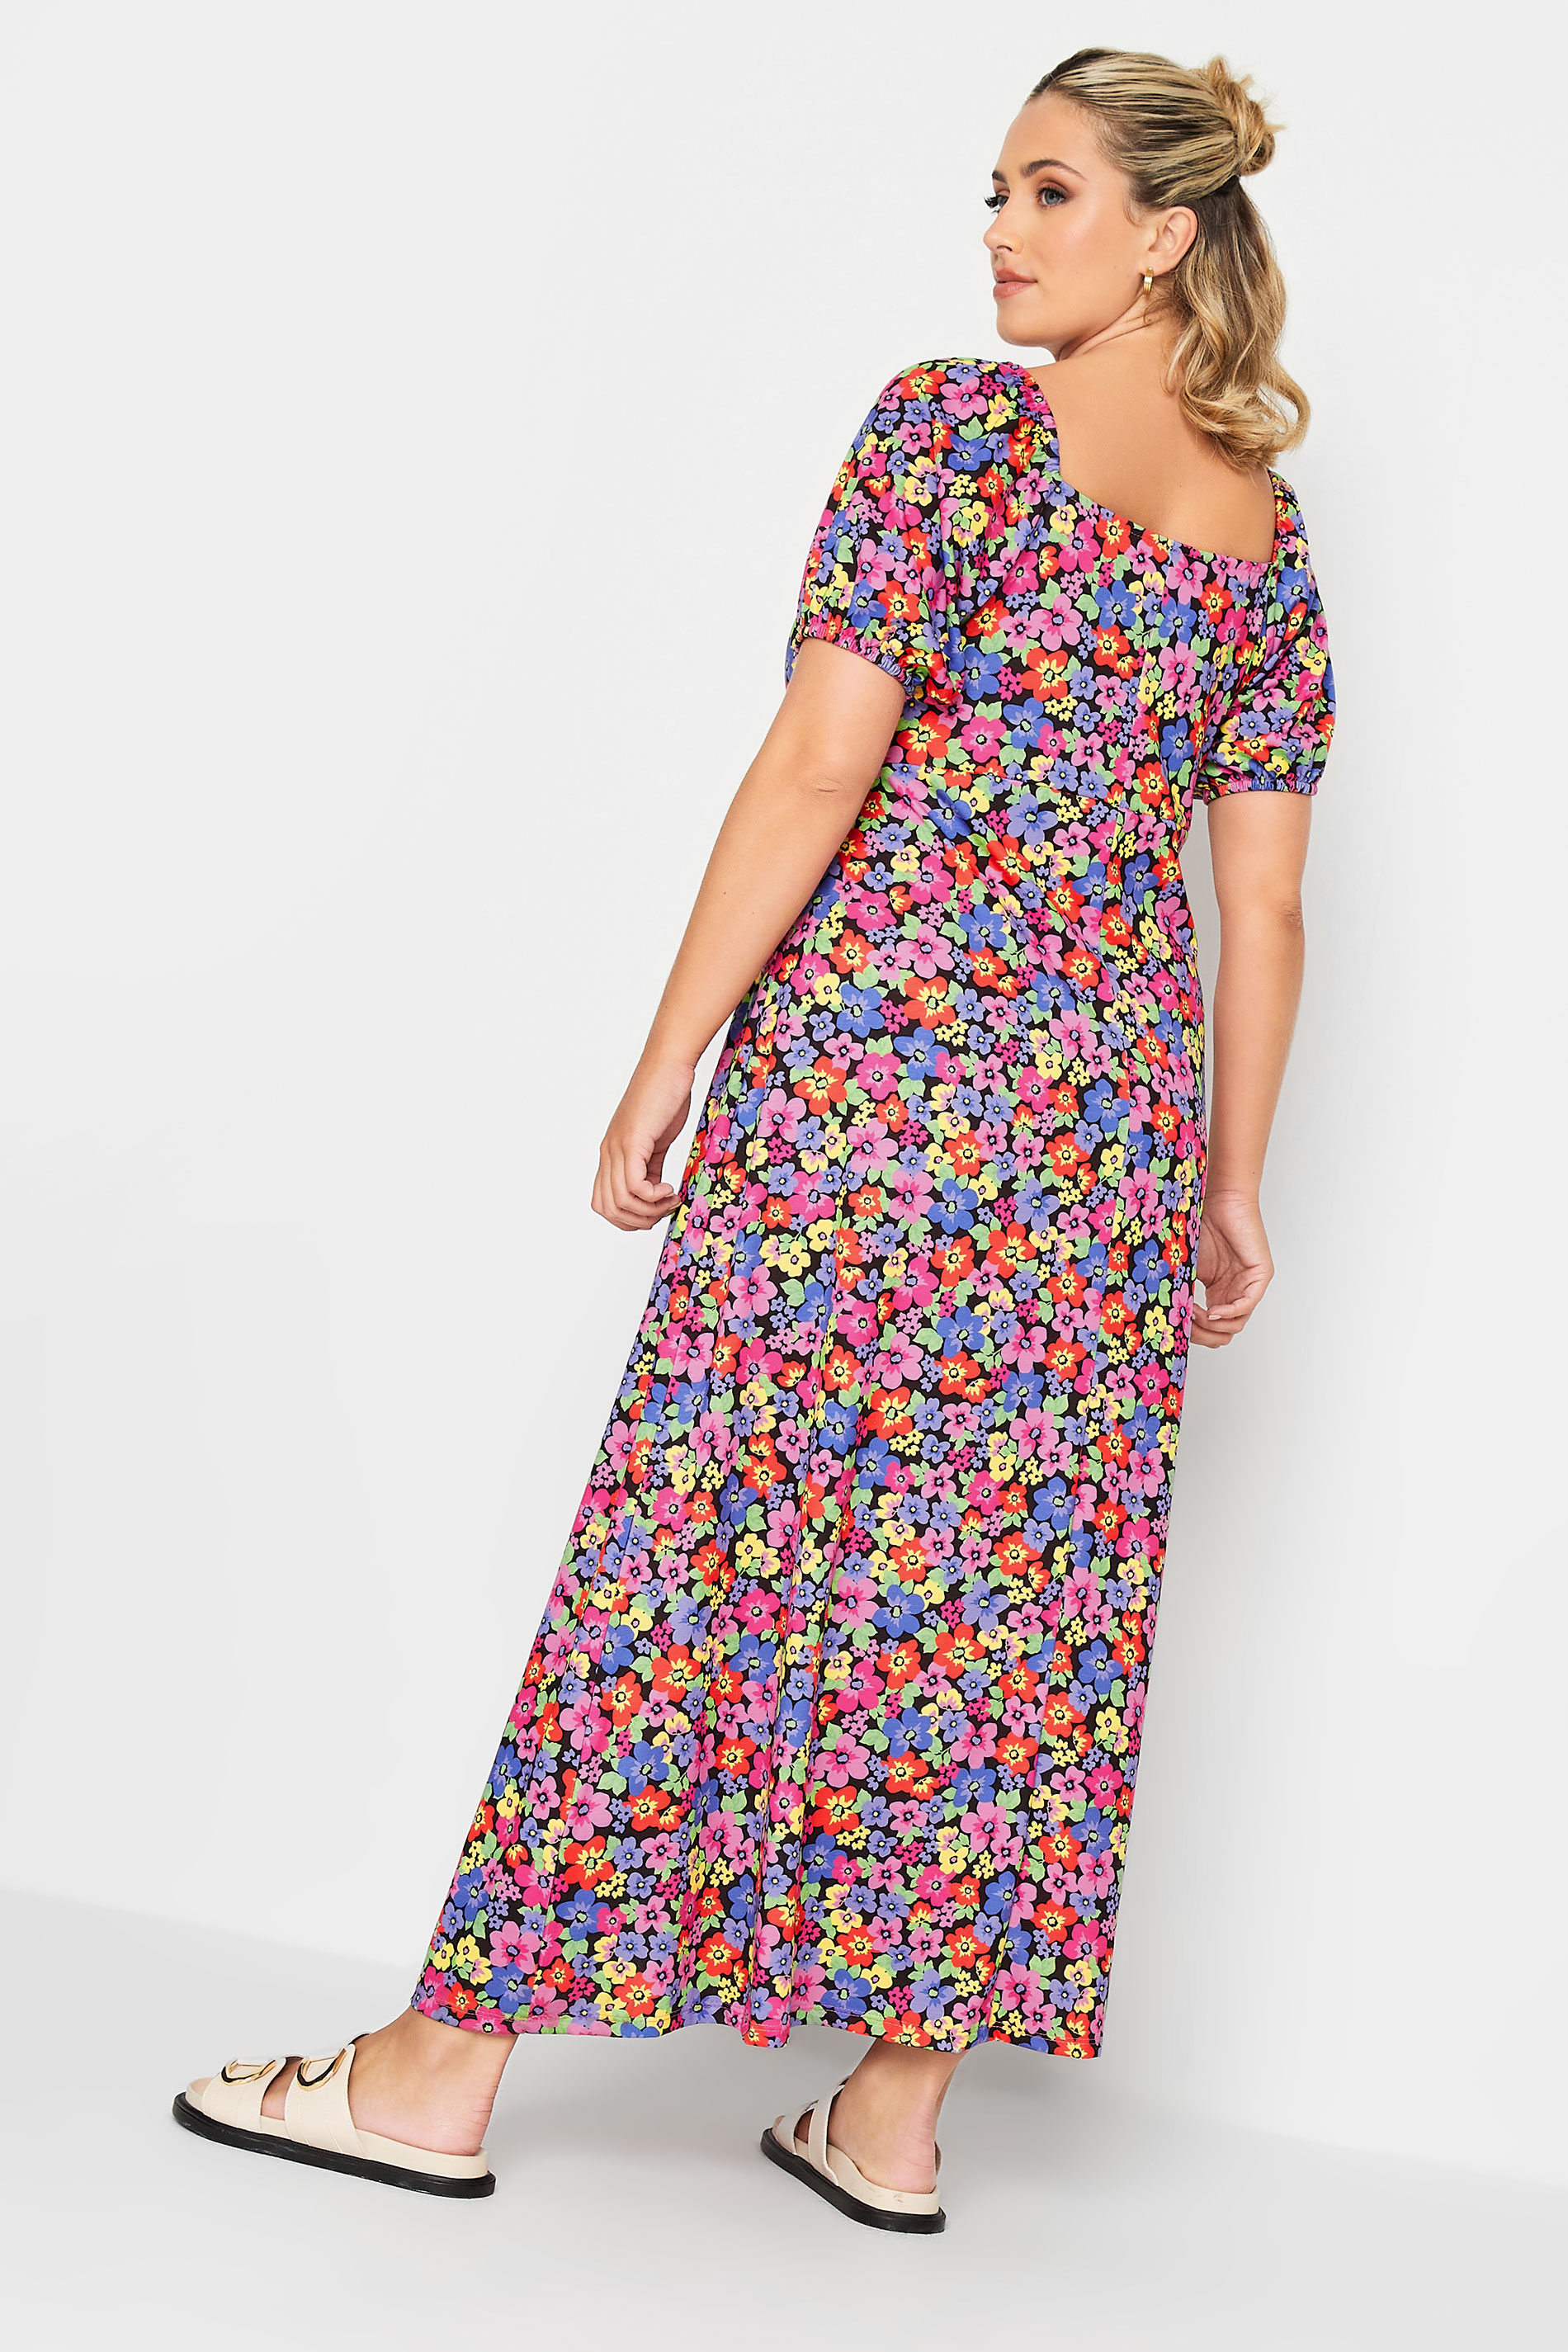 YOURS Plus Size Black & Pink Floral Wrap Maxi Dress | Yours Clothing  3